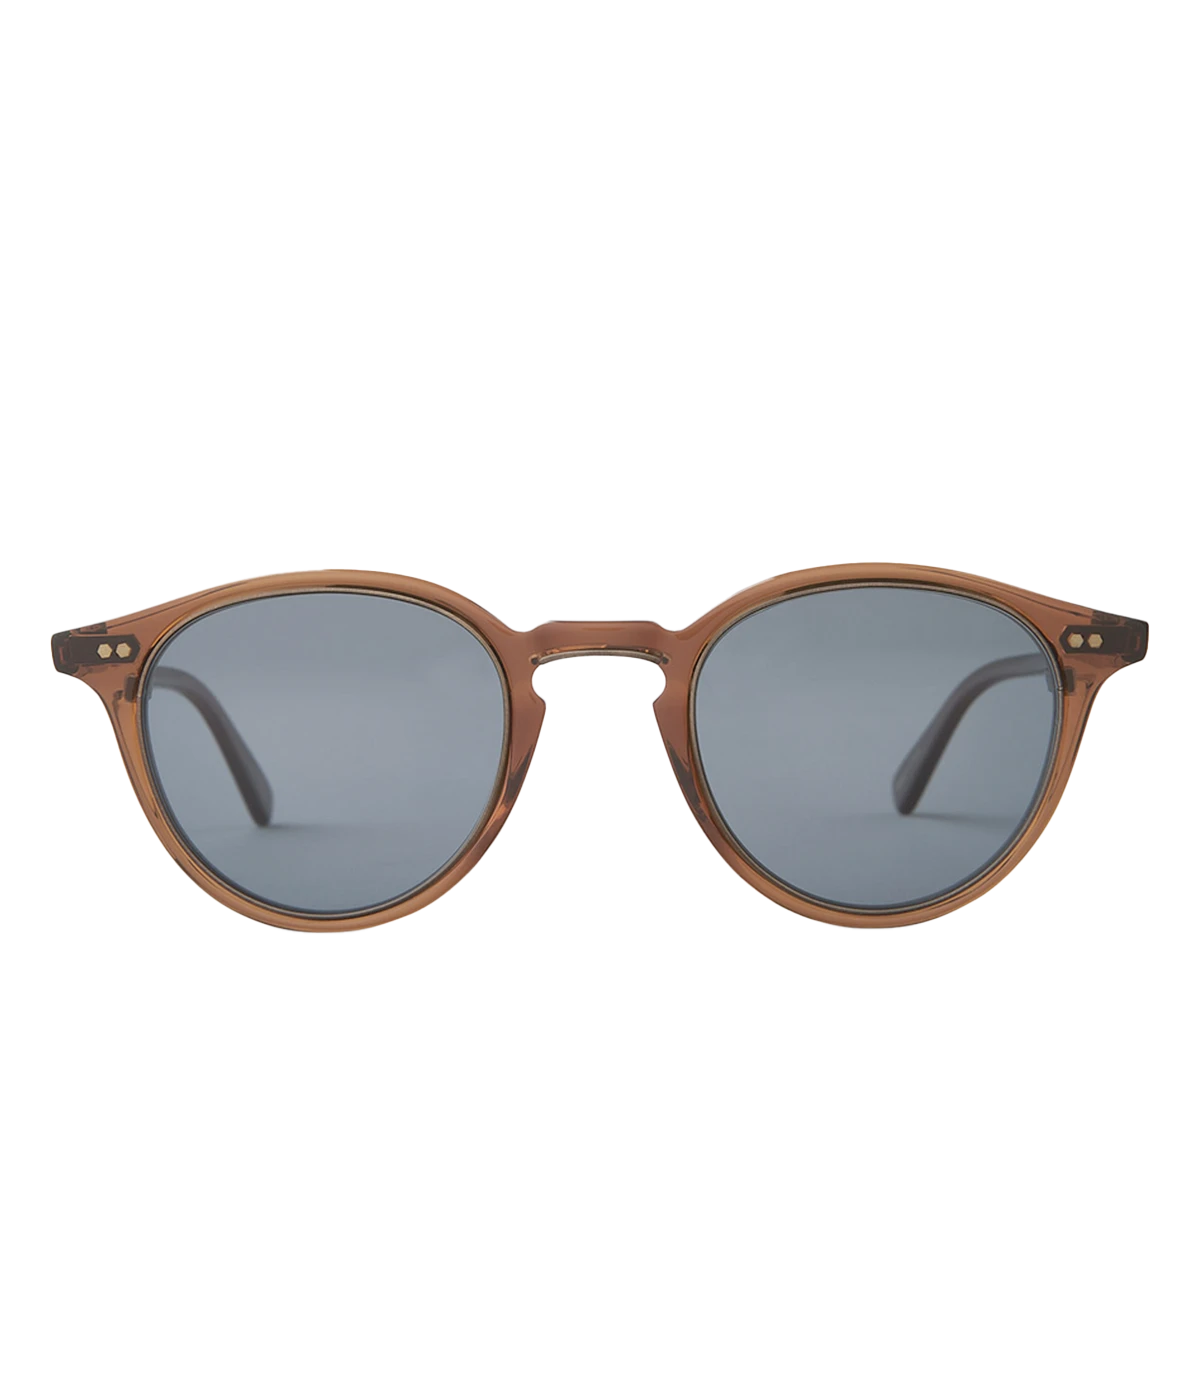 Marmont II S 48 Sunglasses in Antique Gold & Blue Opal